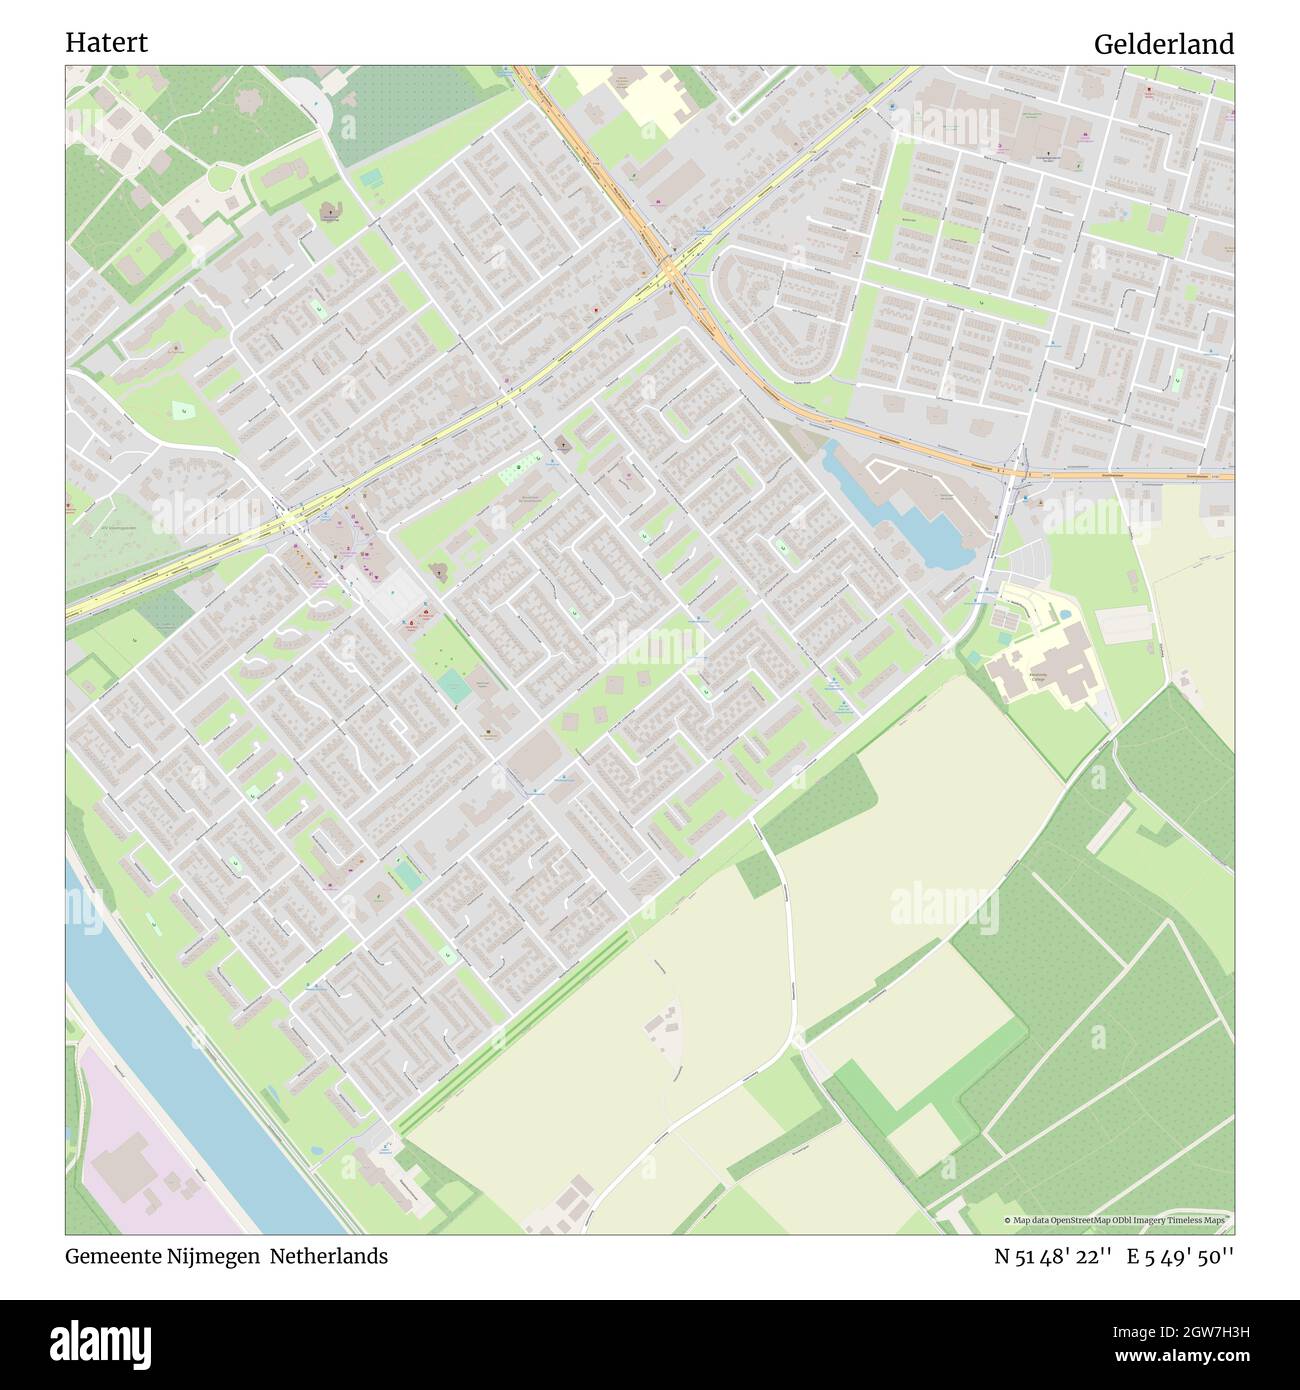 Hatert, Gemeente Nijmegen, Netherlands, Gelderland, N 51 48' 22'', E 5 49' 50'', map, Timeless Map published in 2021. Travelers, explorers and adventurers like Florence Nightingale, David Livingstone, Ernest Shackleton, Lewis and Clark and Sherlock Holmes relied on maps to plan travels to the world's most remote corners, Timeless Maps is mapping most locations on the globe, showing the achievement of great dreams Stock Photo